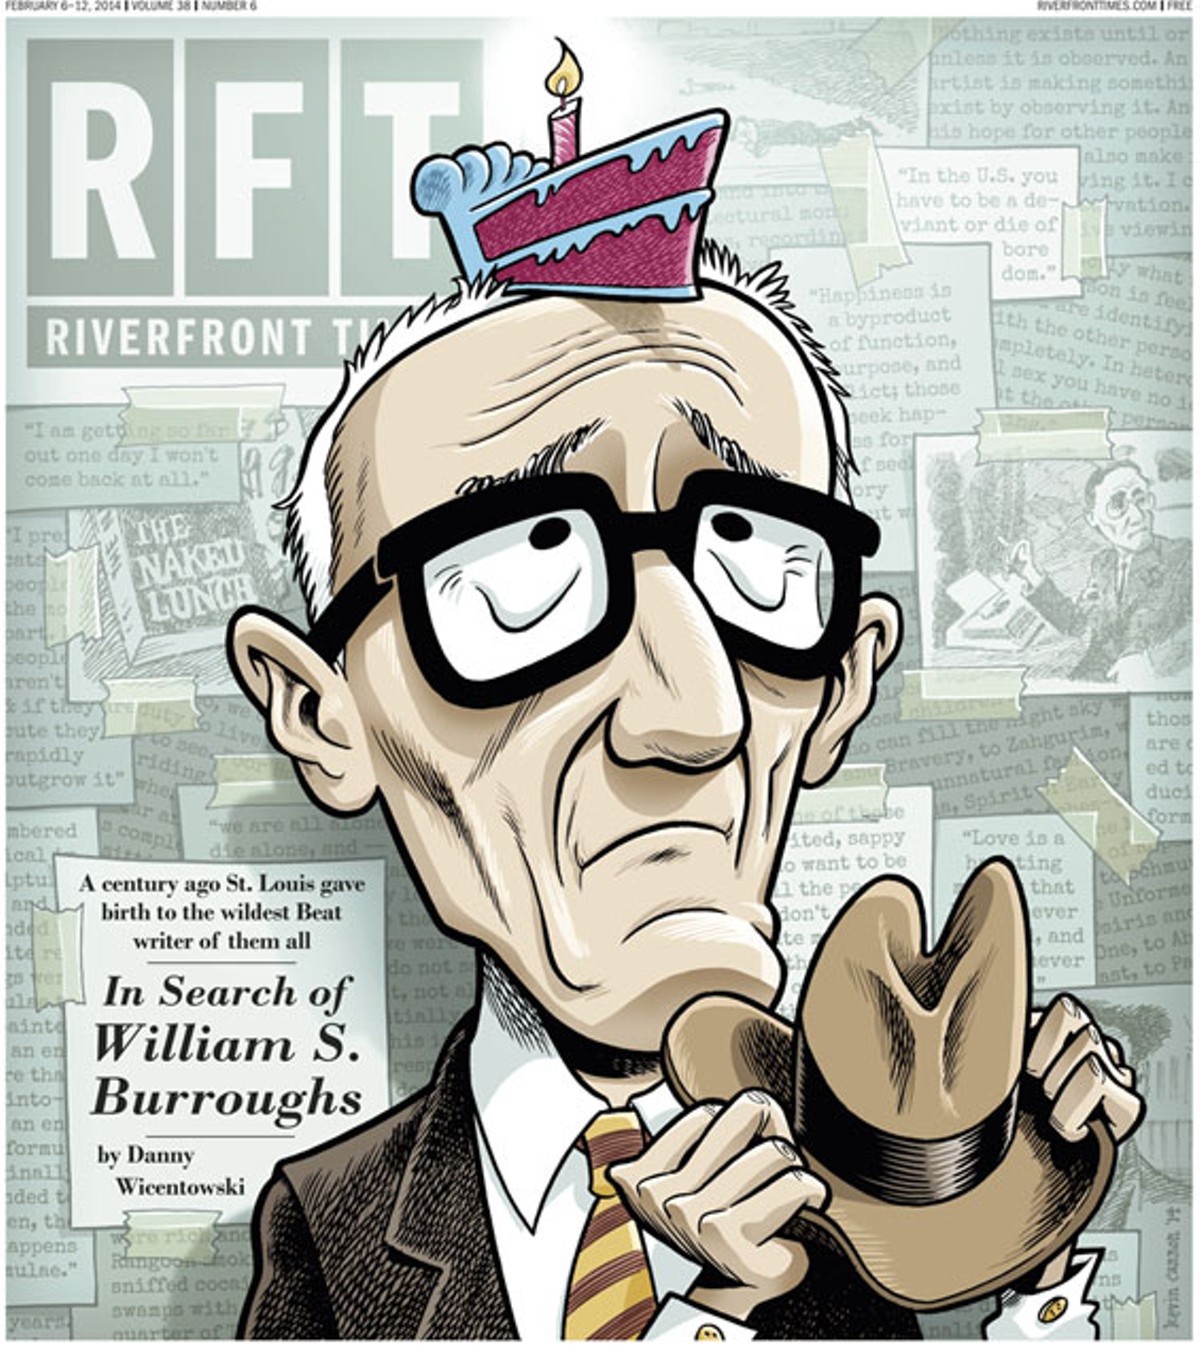 The Cover of the February 6 Print Edition